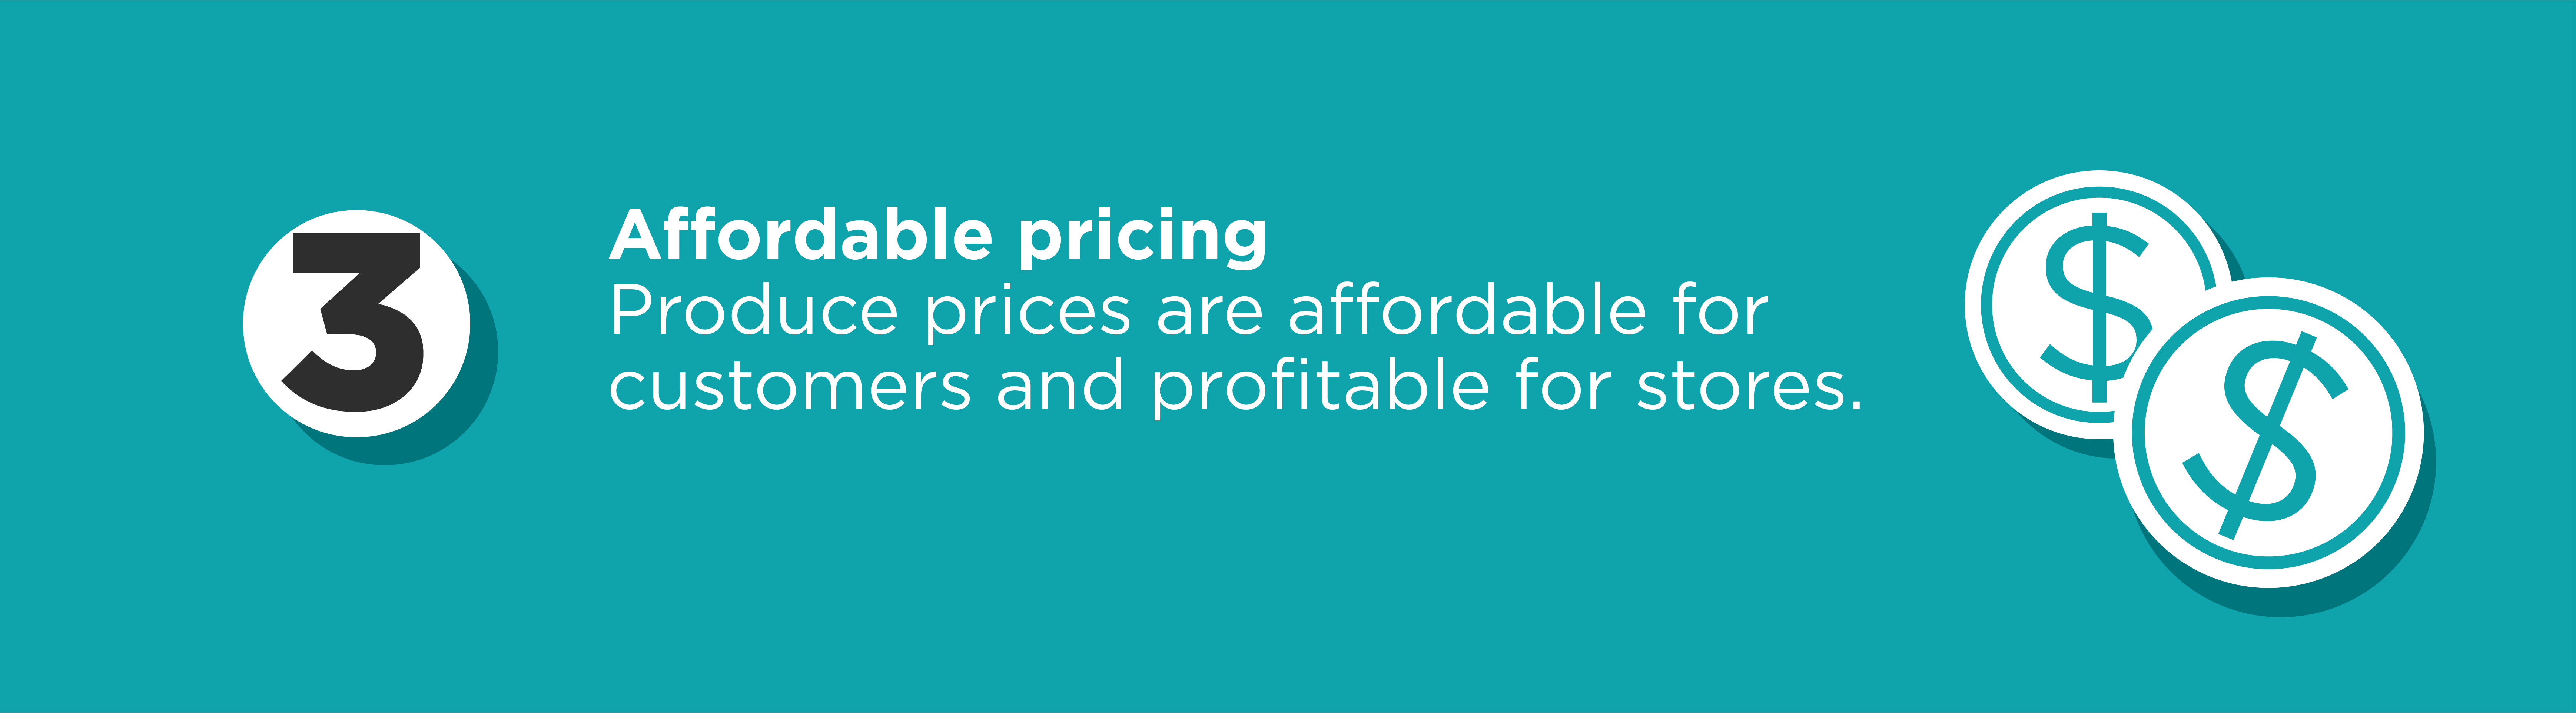 affordable pricing